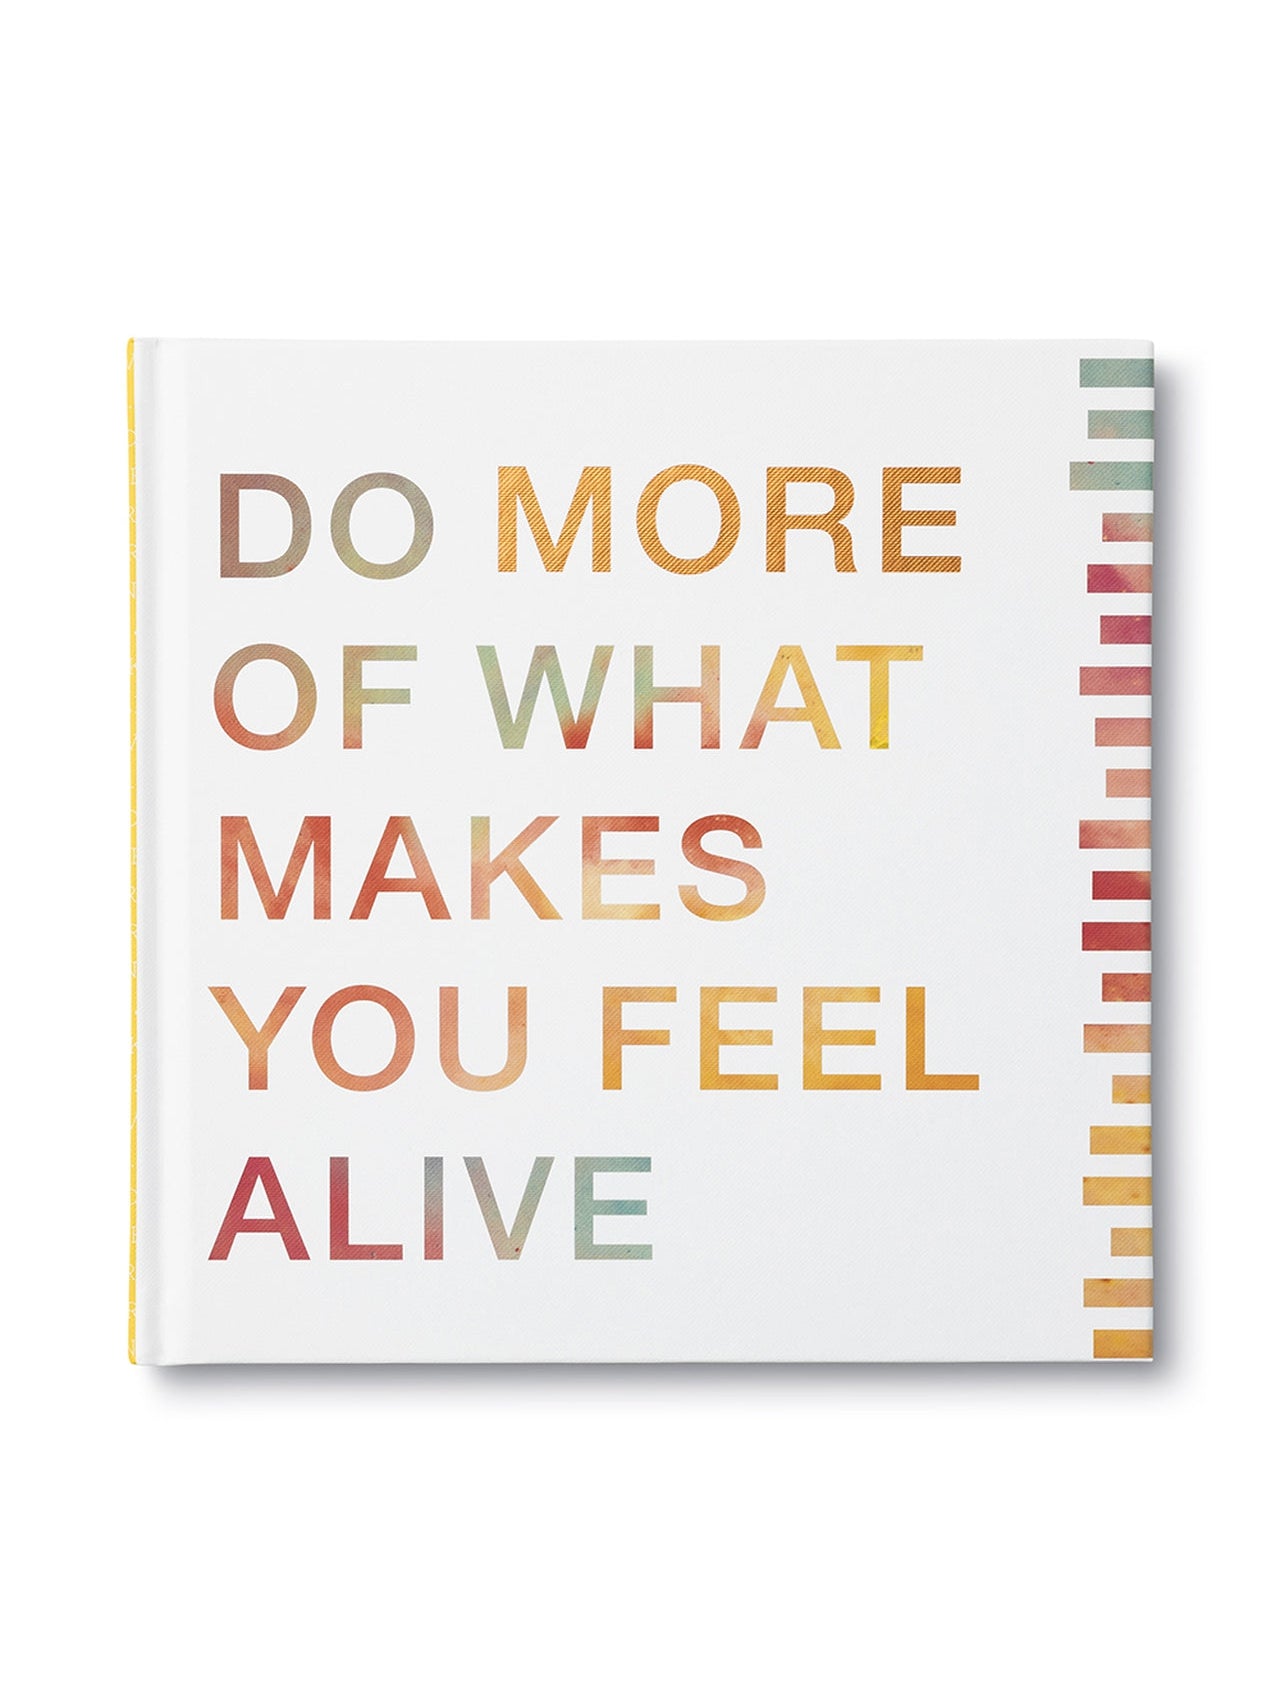 Do More of What Makes You Feel Alive